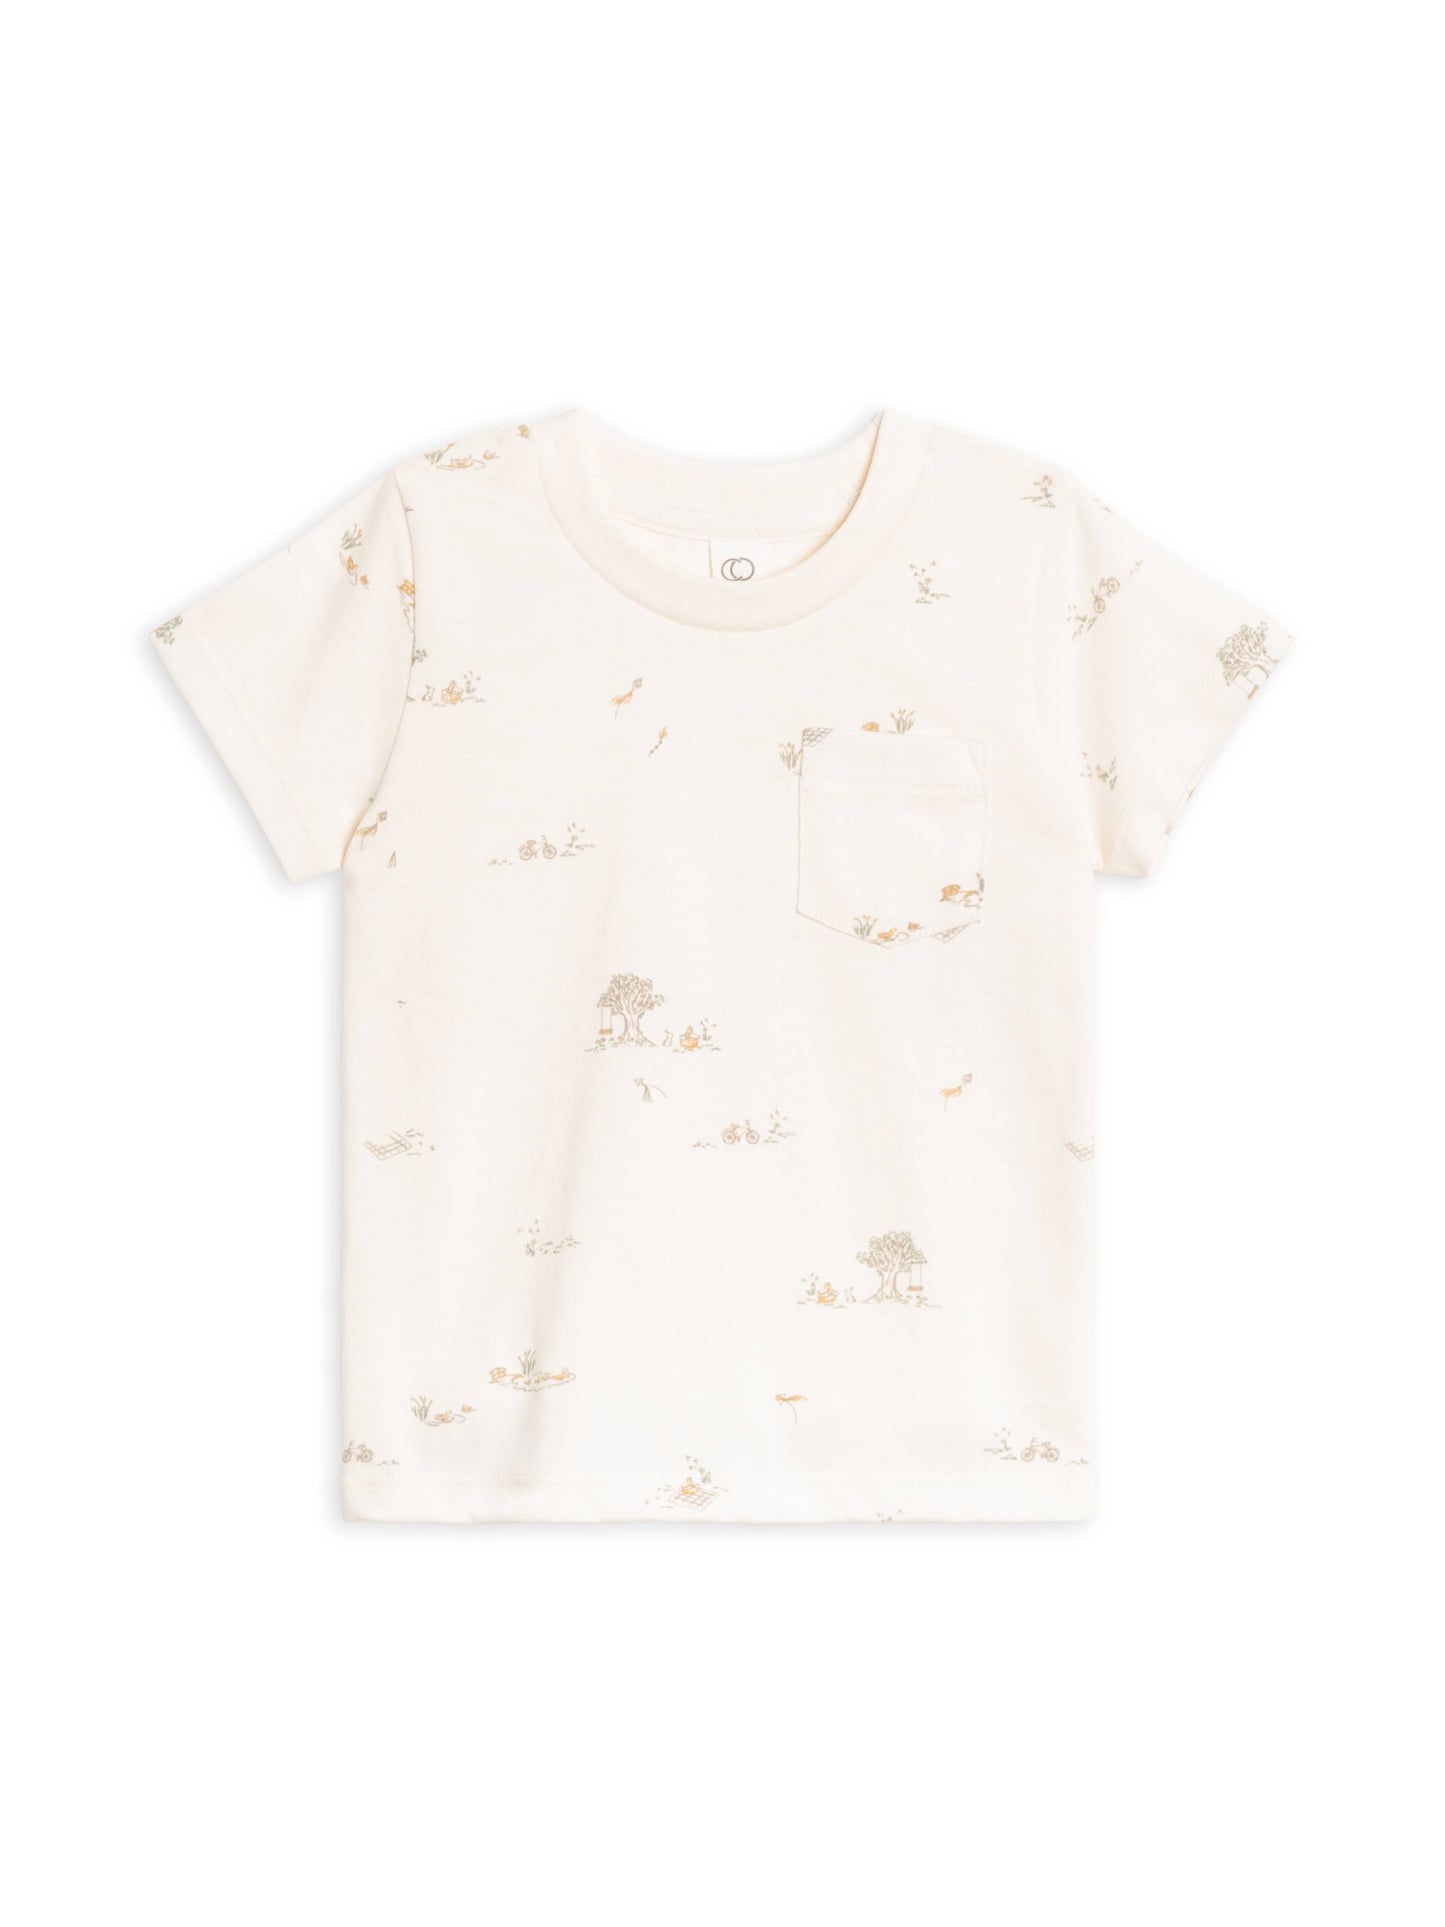 Colored Organics - Organic Baby & Kids Everest Tee - Picnic in the Park